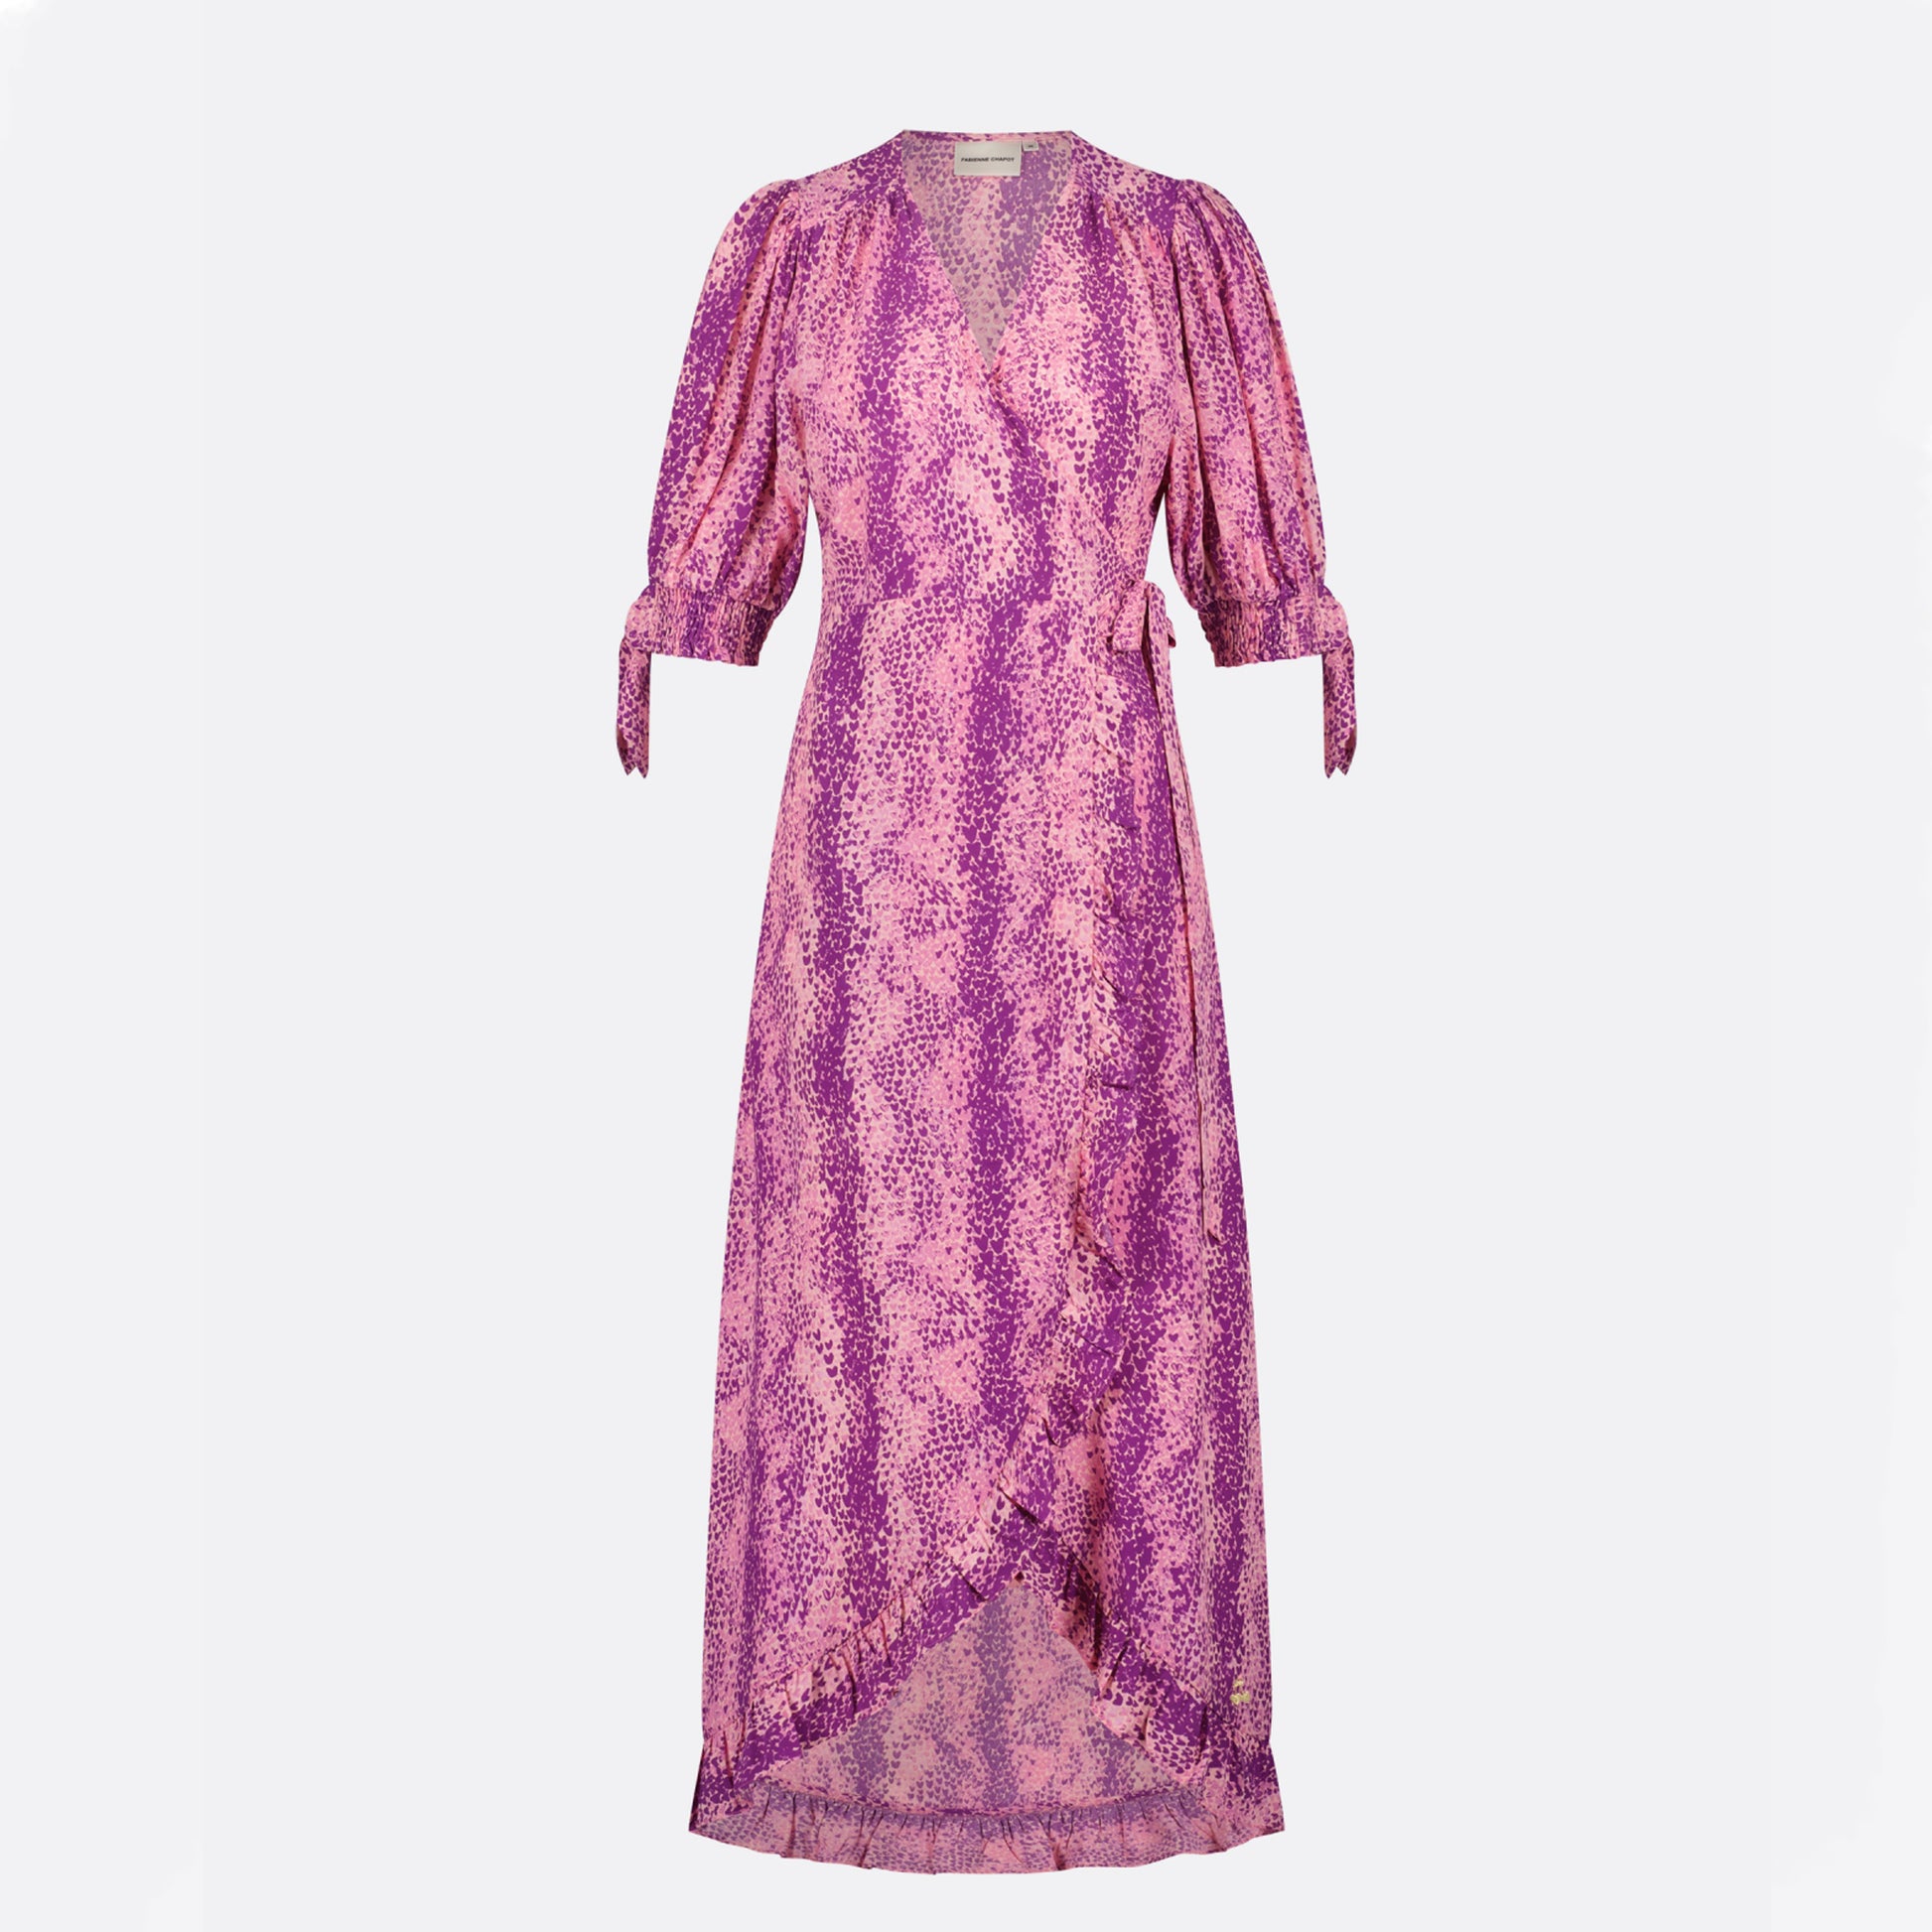 A Channa Dress - Magic Magenta with ruffled sleeves from Fabienne Chapot.